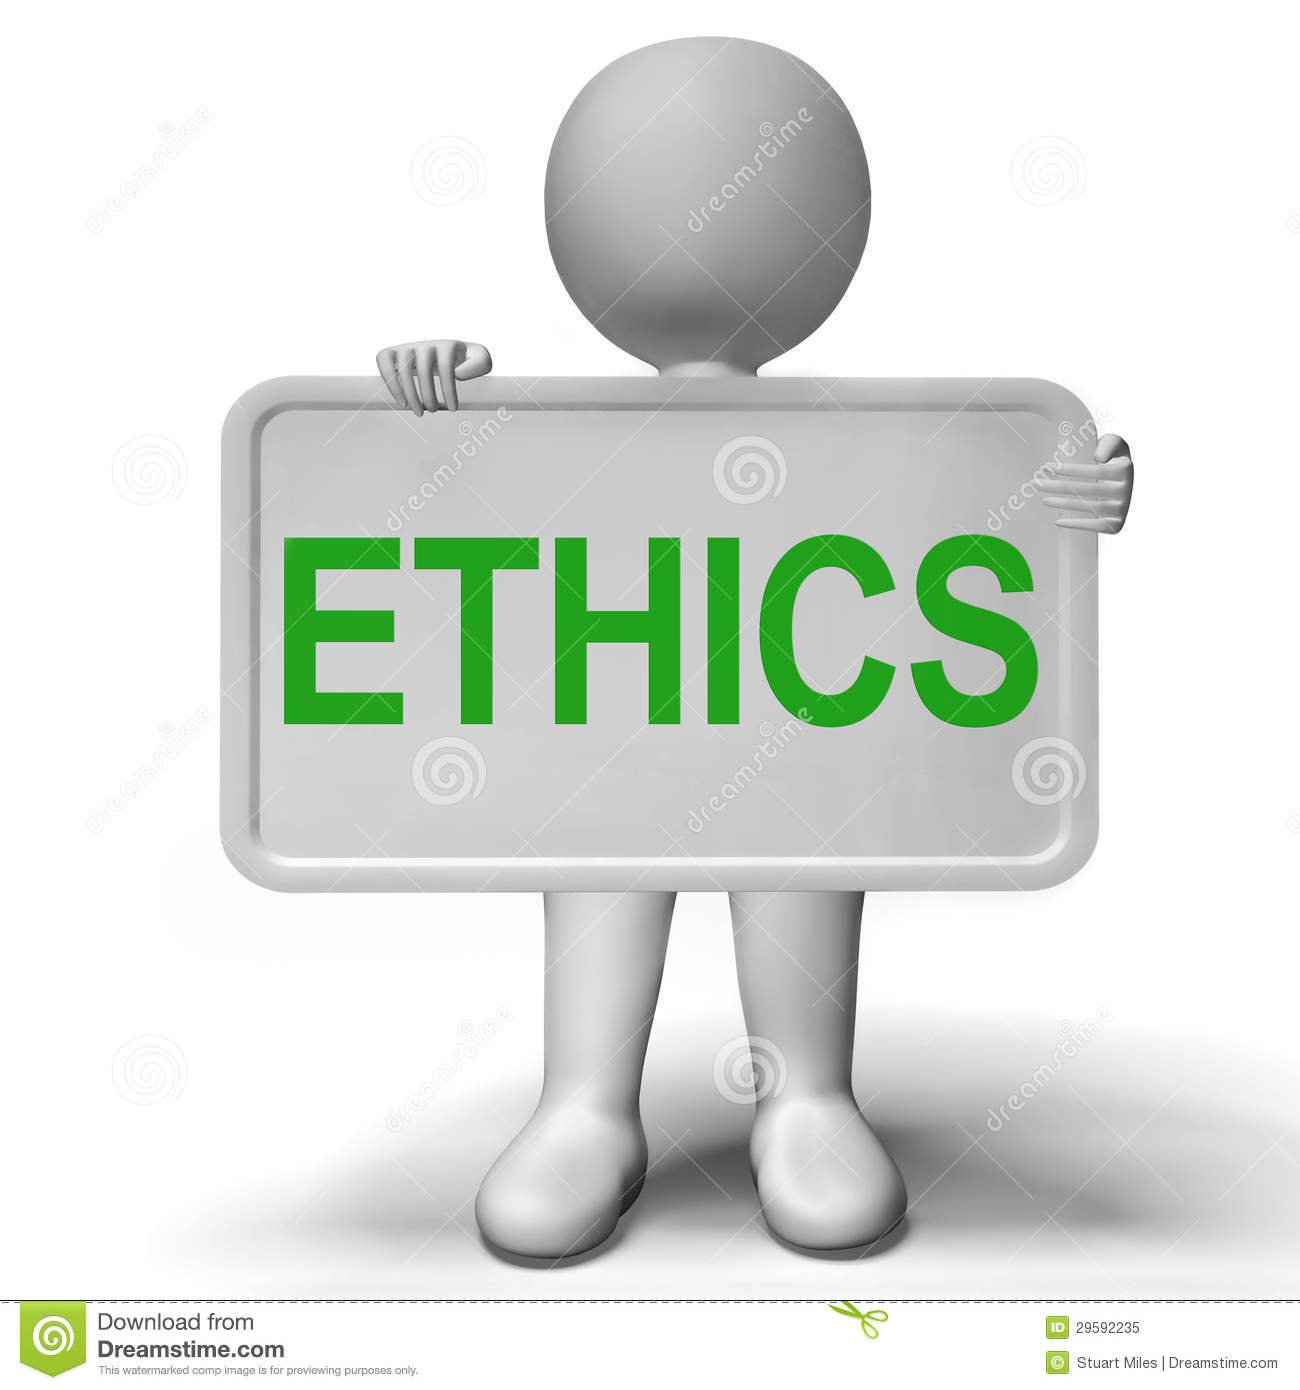 Ethics Sign Showing Values Ideology And Principles Royalty Free Stock